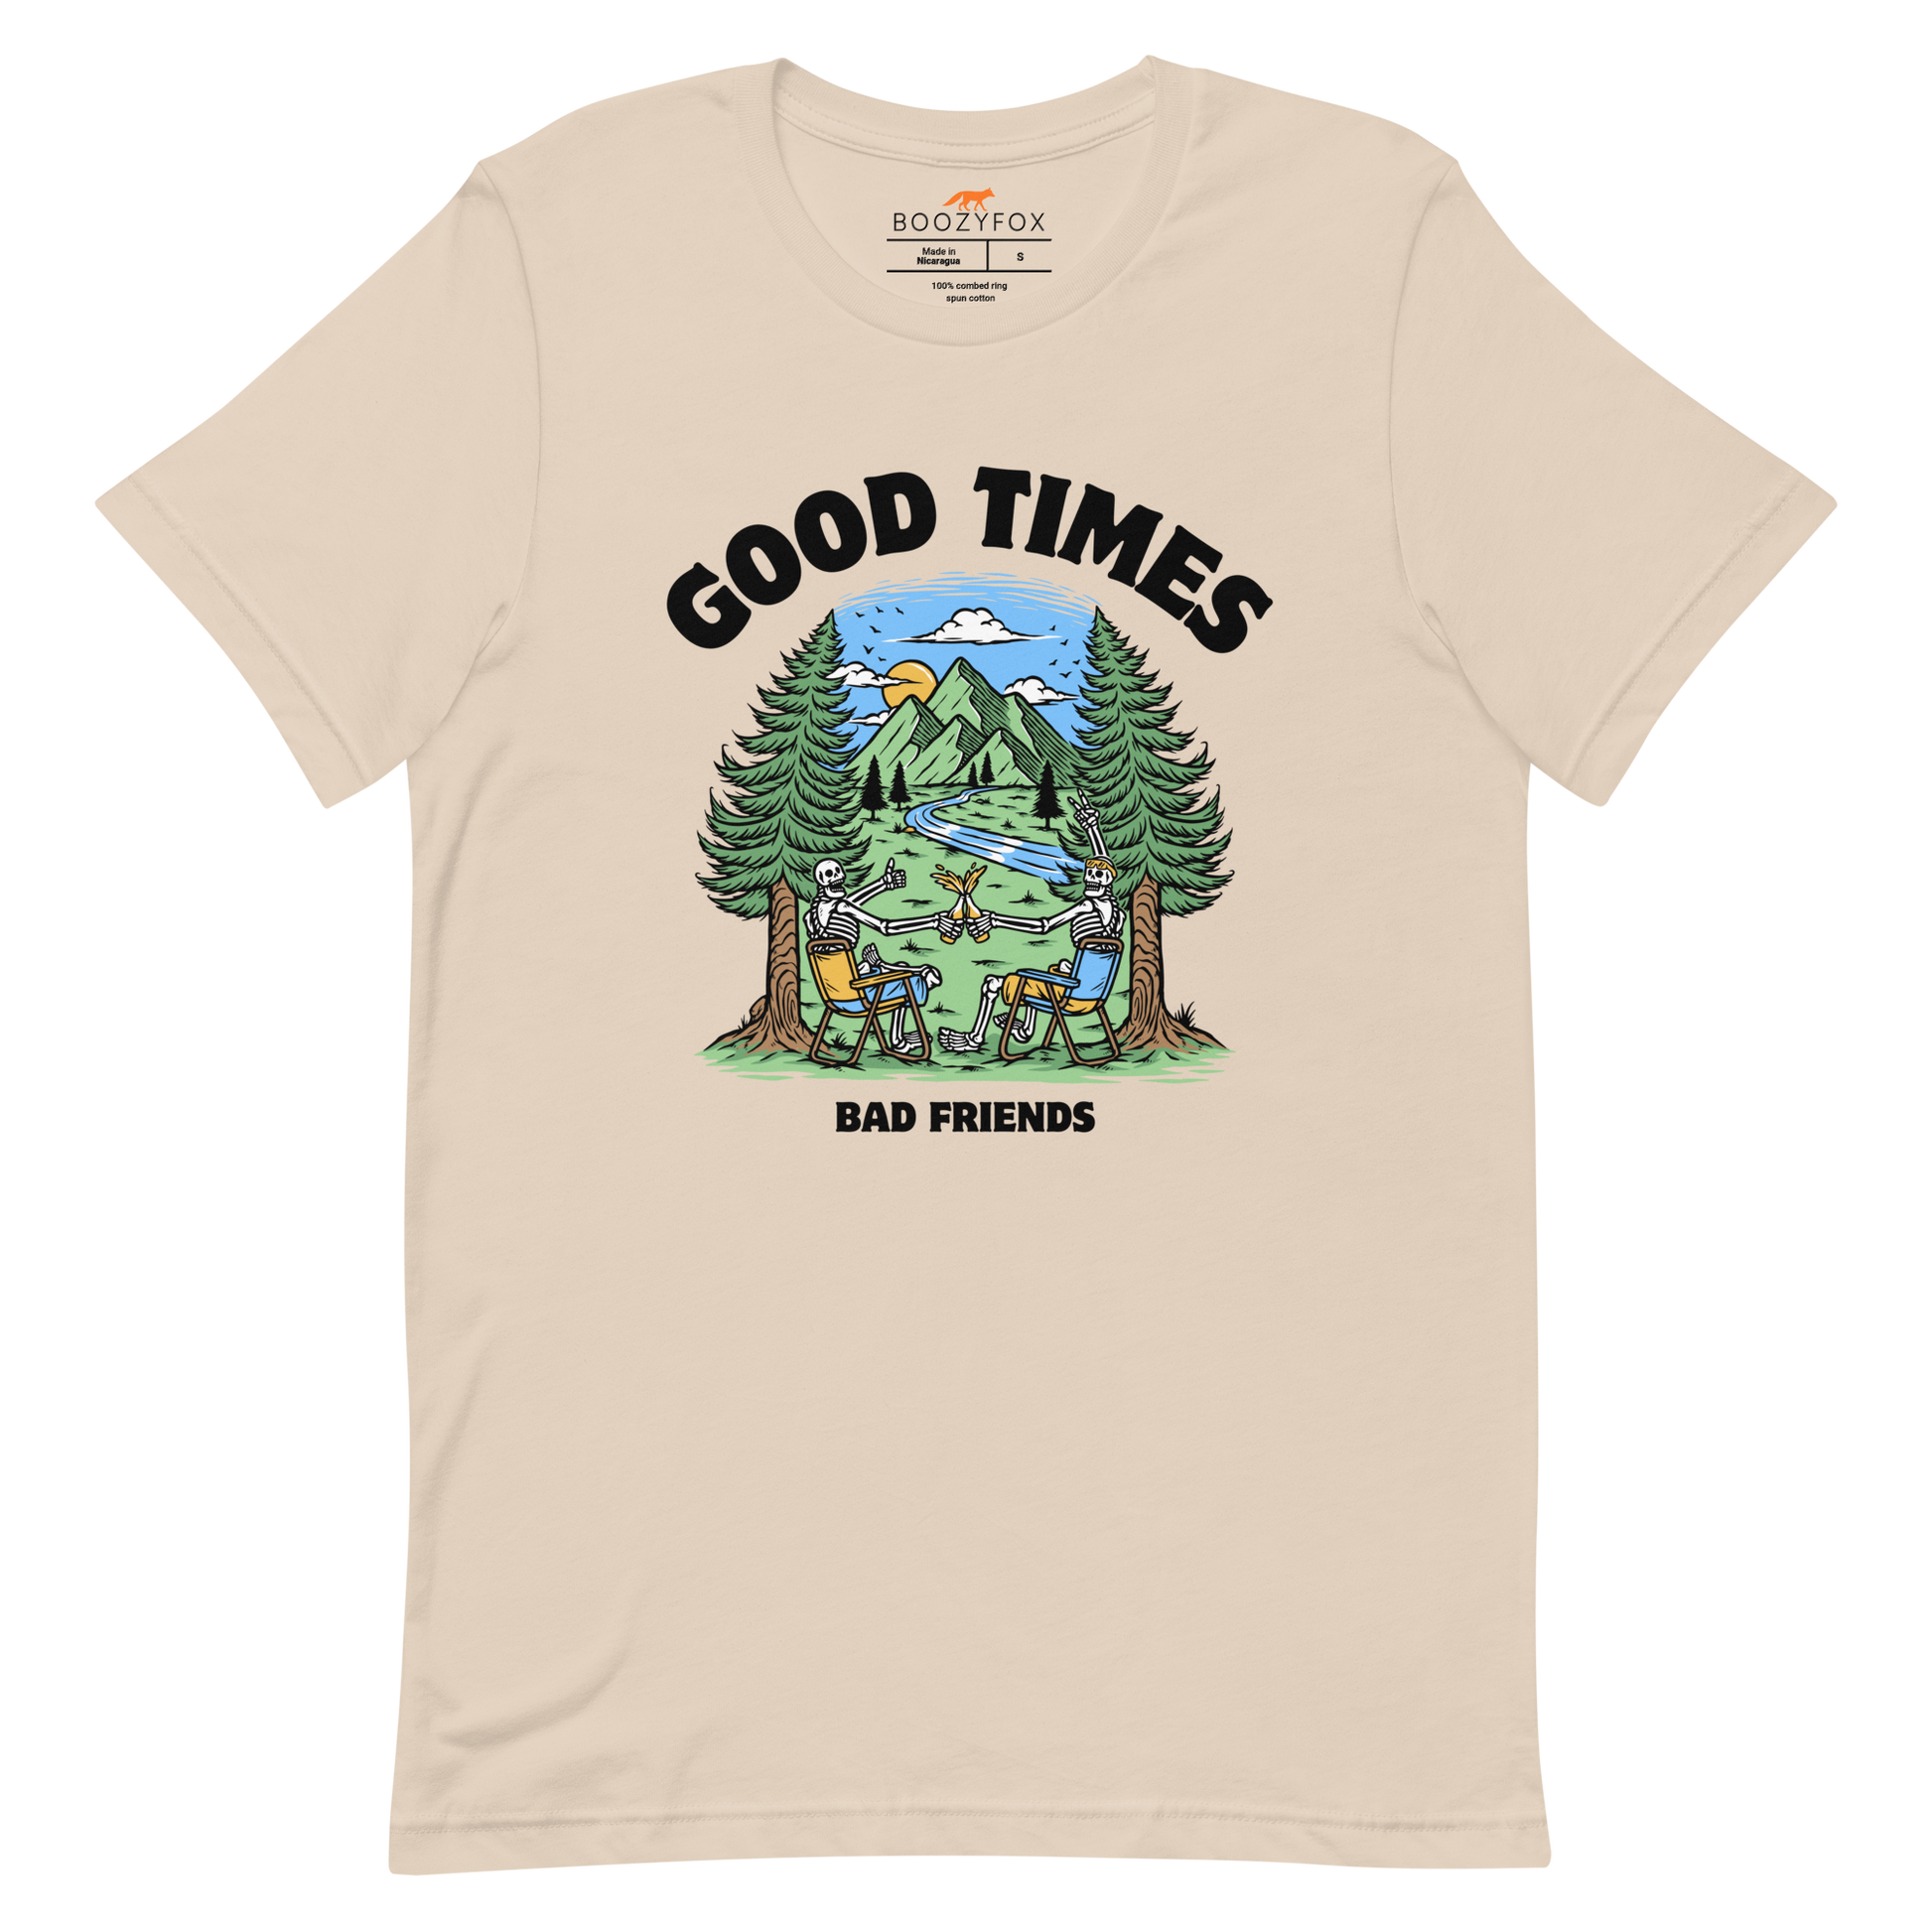 Soft Cream Premium Good Times Bad Friends Tee featuring a lively graphic of friends enjoying a beer in nature - Funny Graphic Nature Tees - Boozy Fox